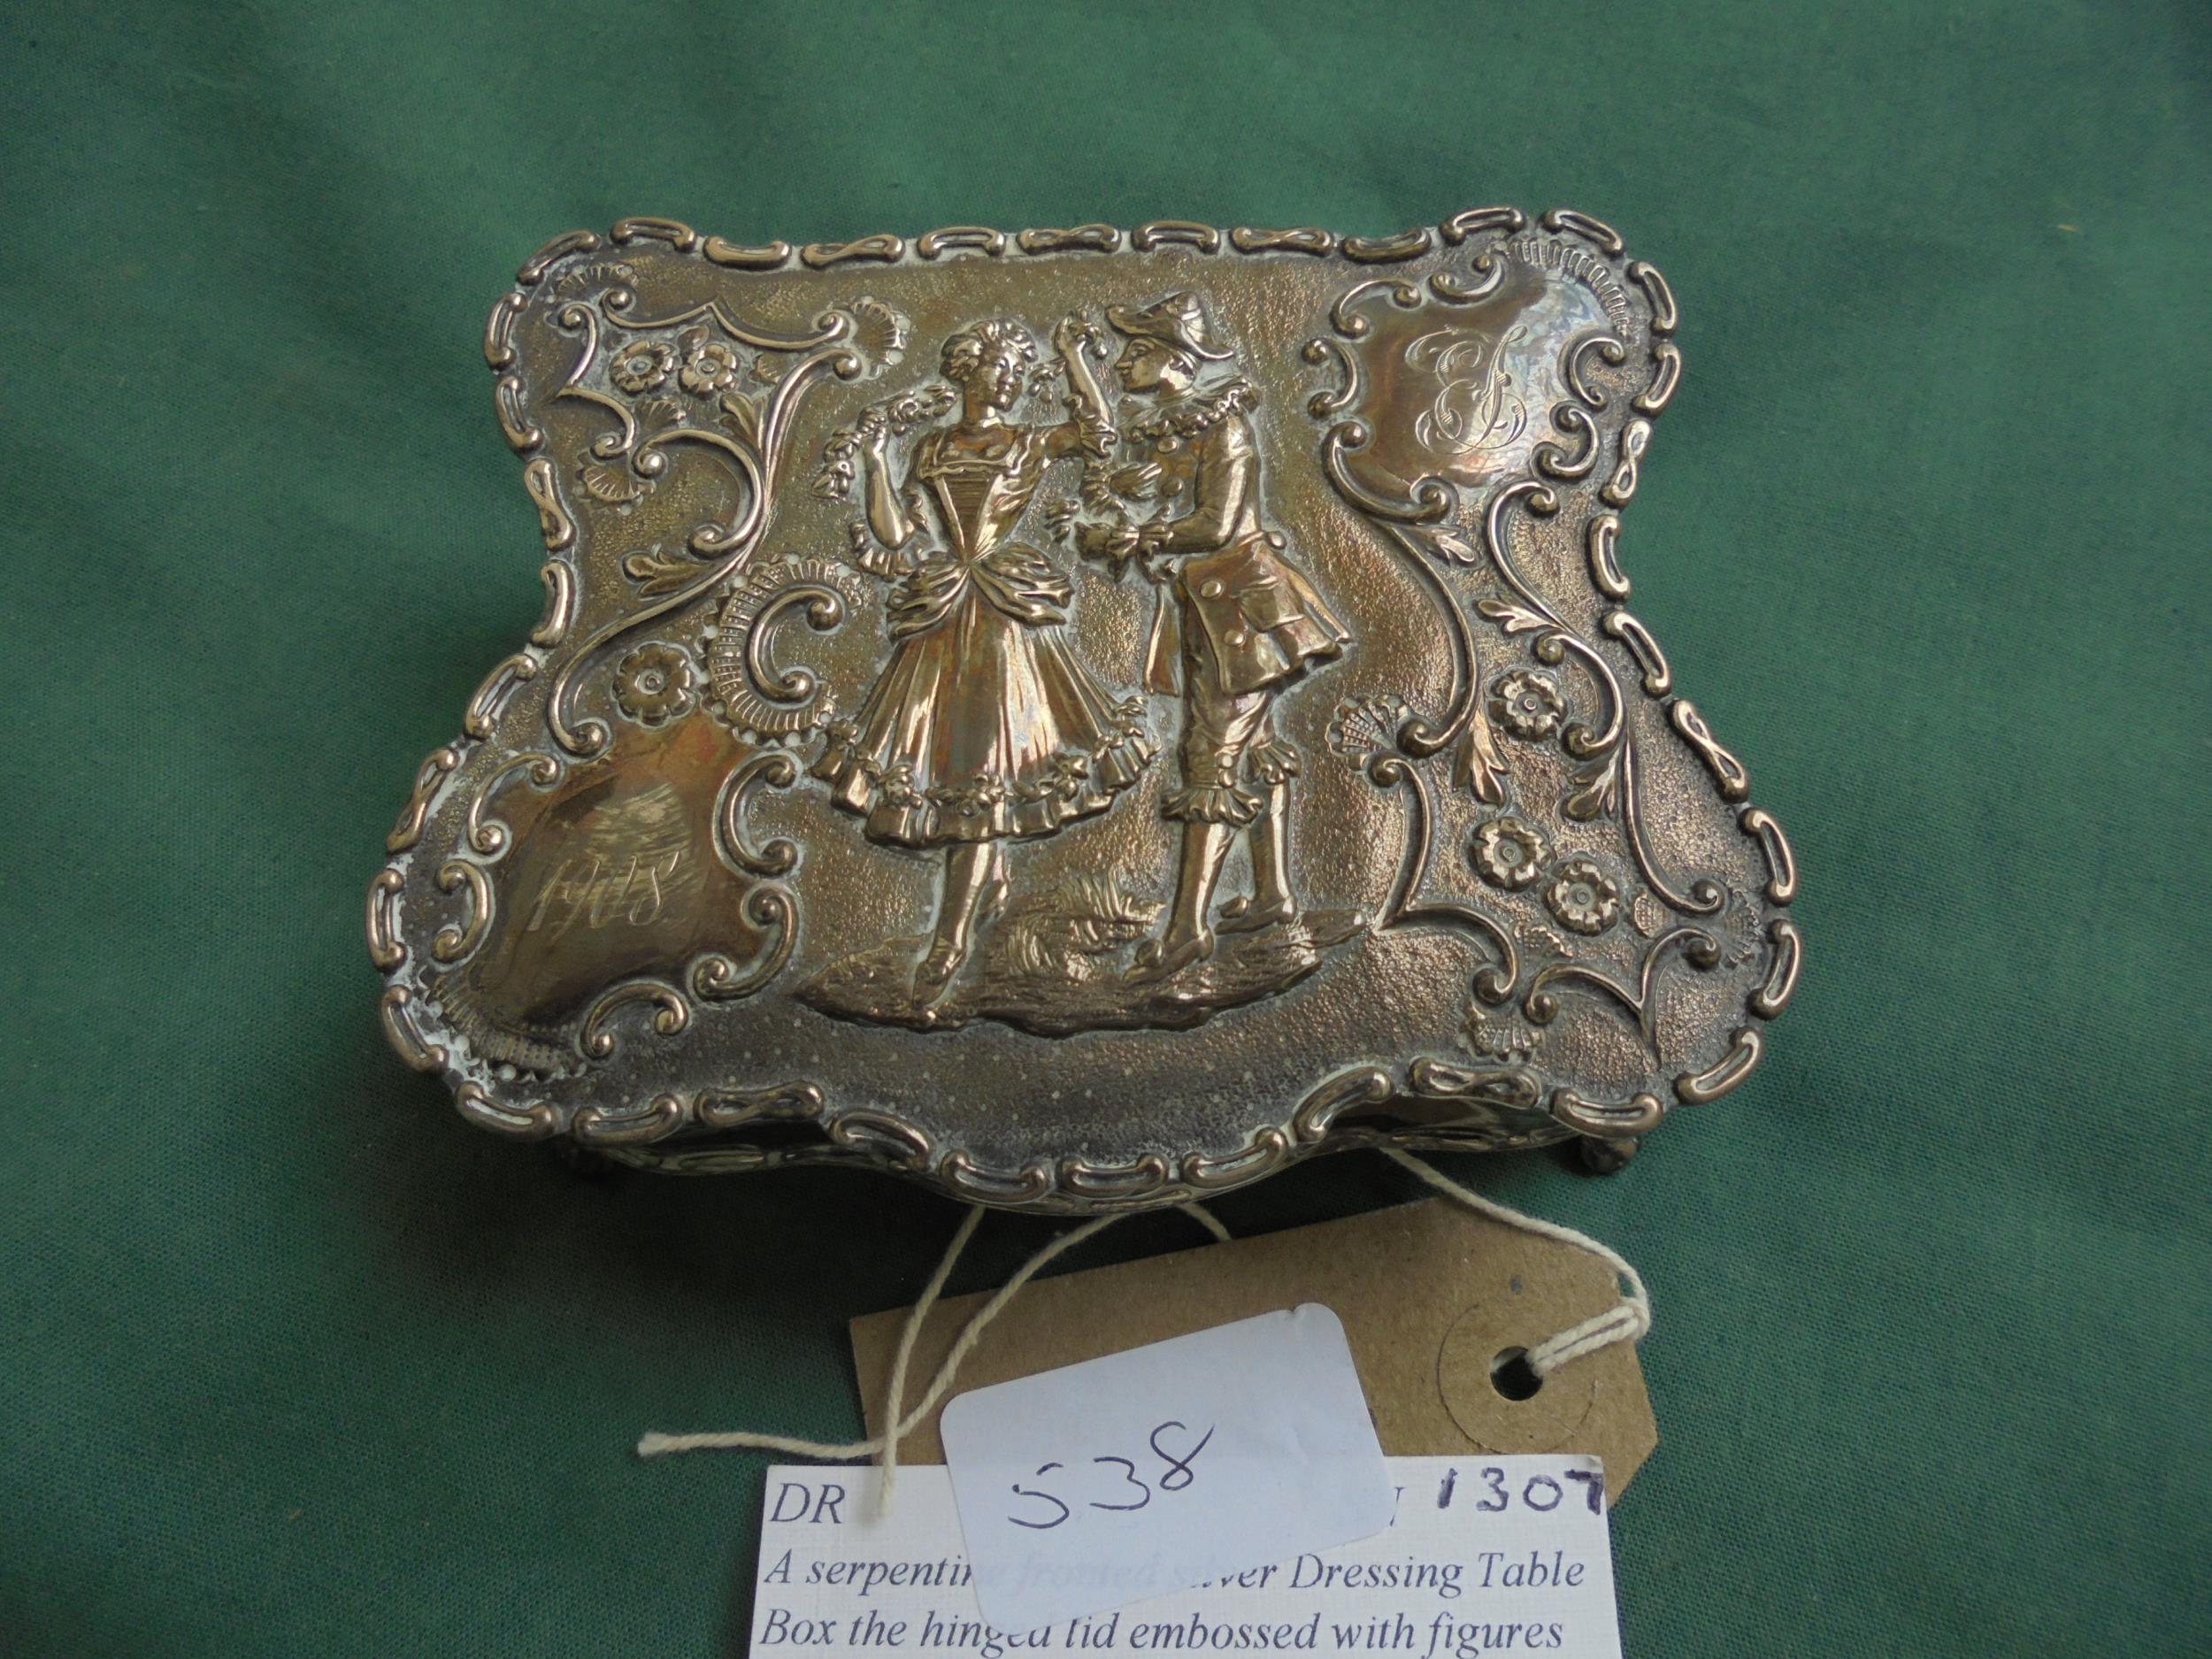 Highly ddecorated laddies jewellery/ring box with hinged lid, serpentine front, - Image 2 of 2